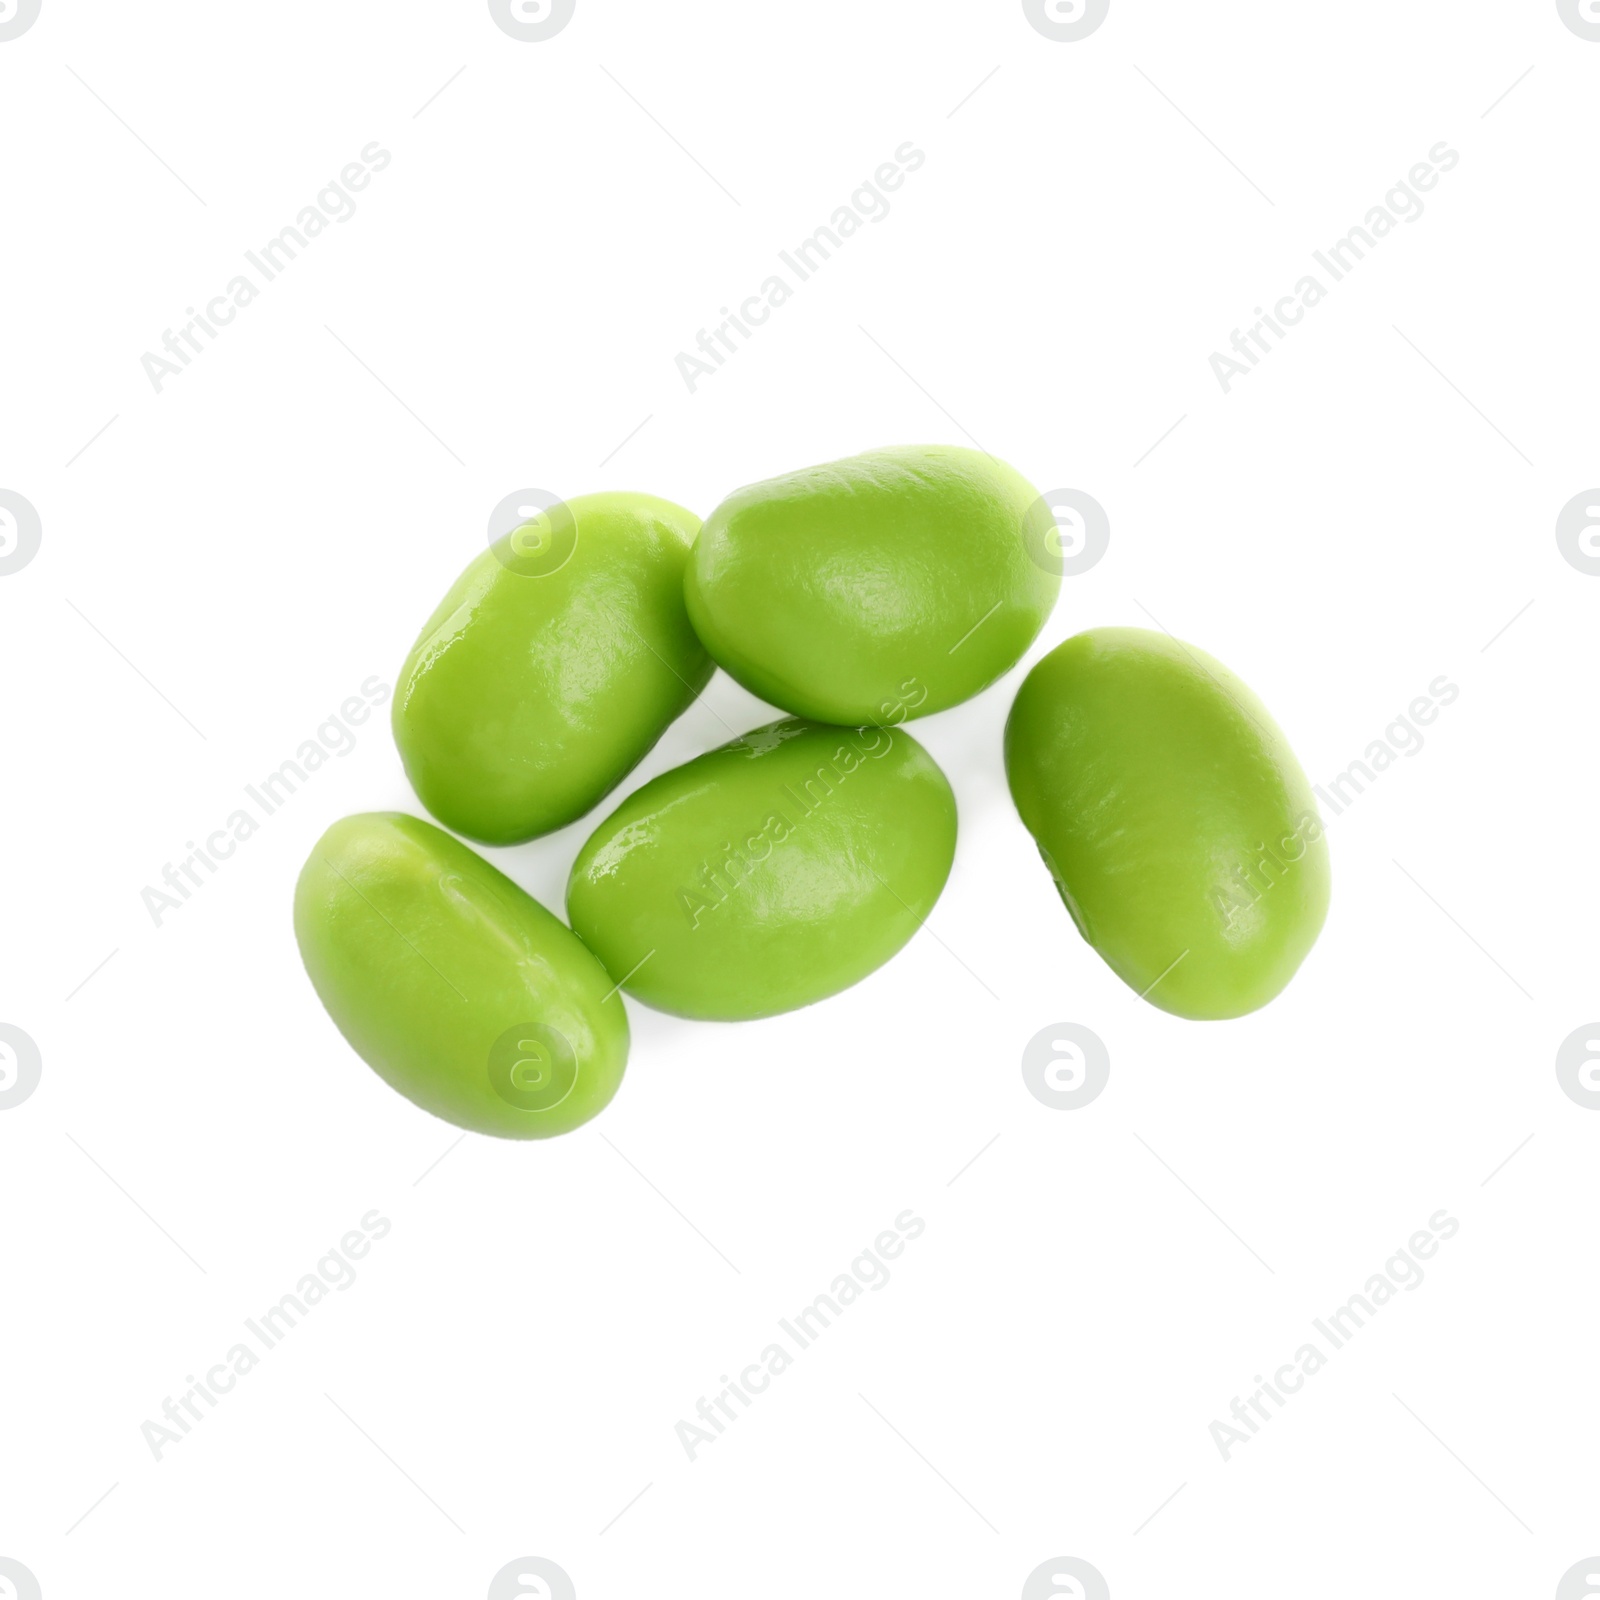 Photo of Fresh green edamame soybeans on white background, top view